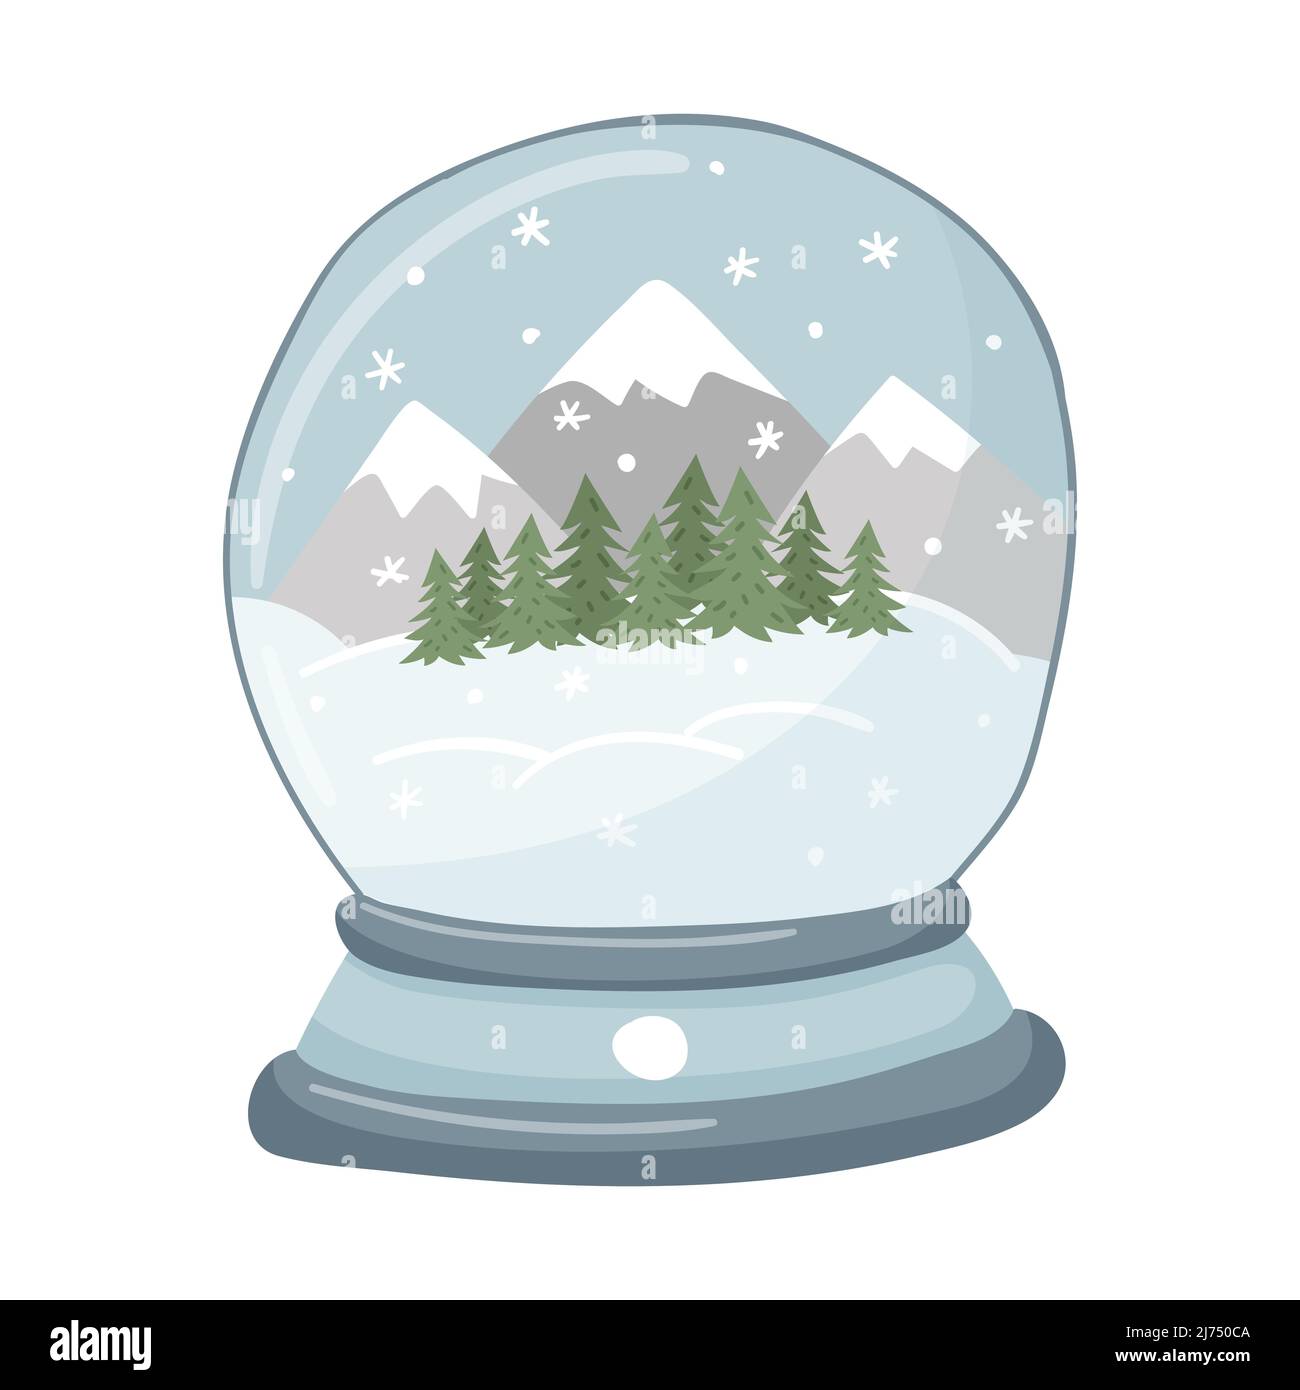 A snow globe with mountains, snowdrifts, forests and snowflakes. Hand-drawn flat Christmas attribute, design element isolated on a white background. H Stock Vector